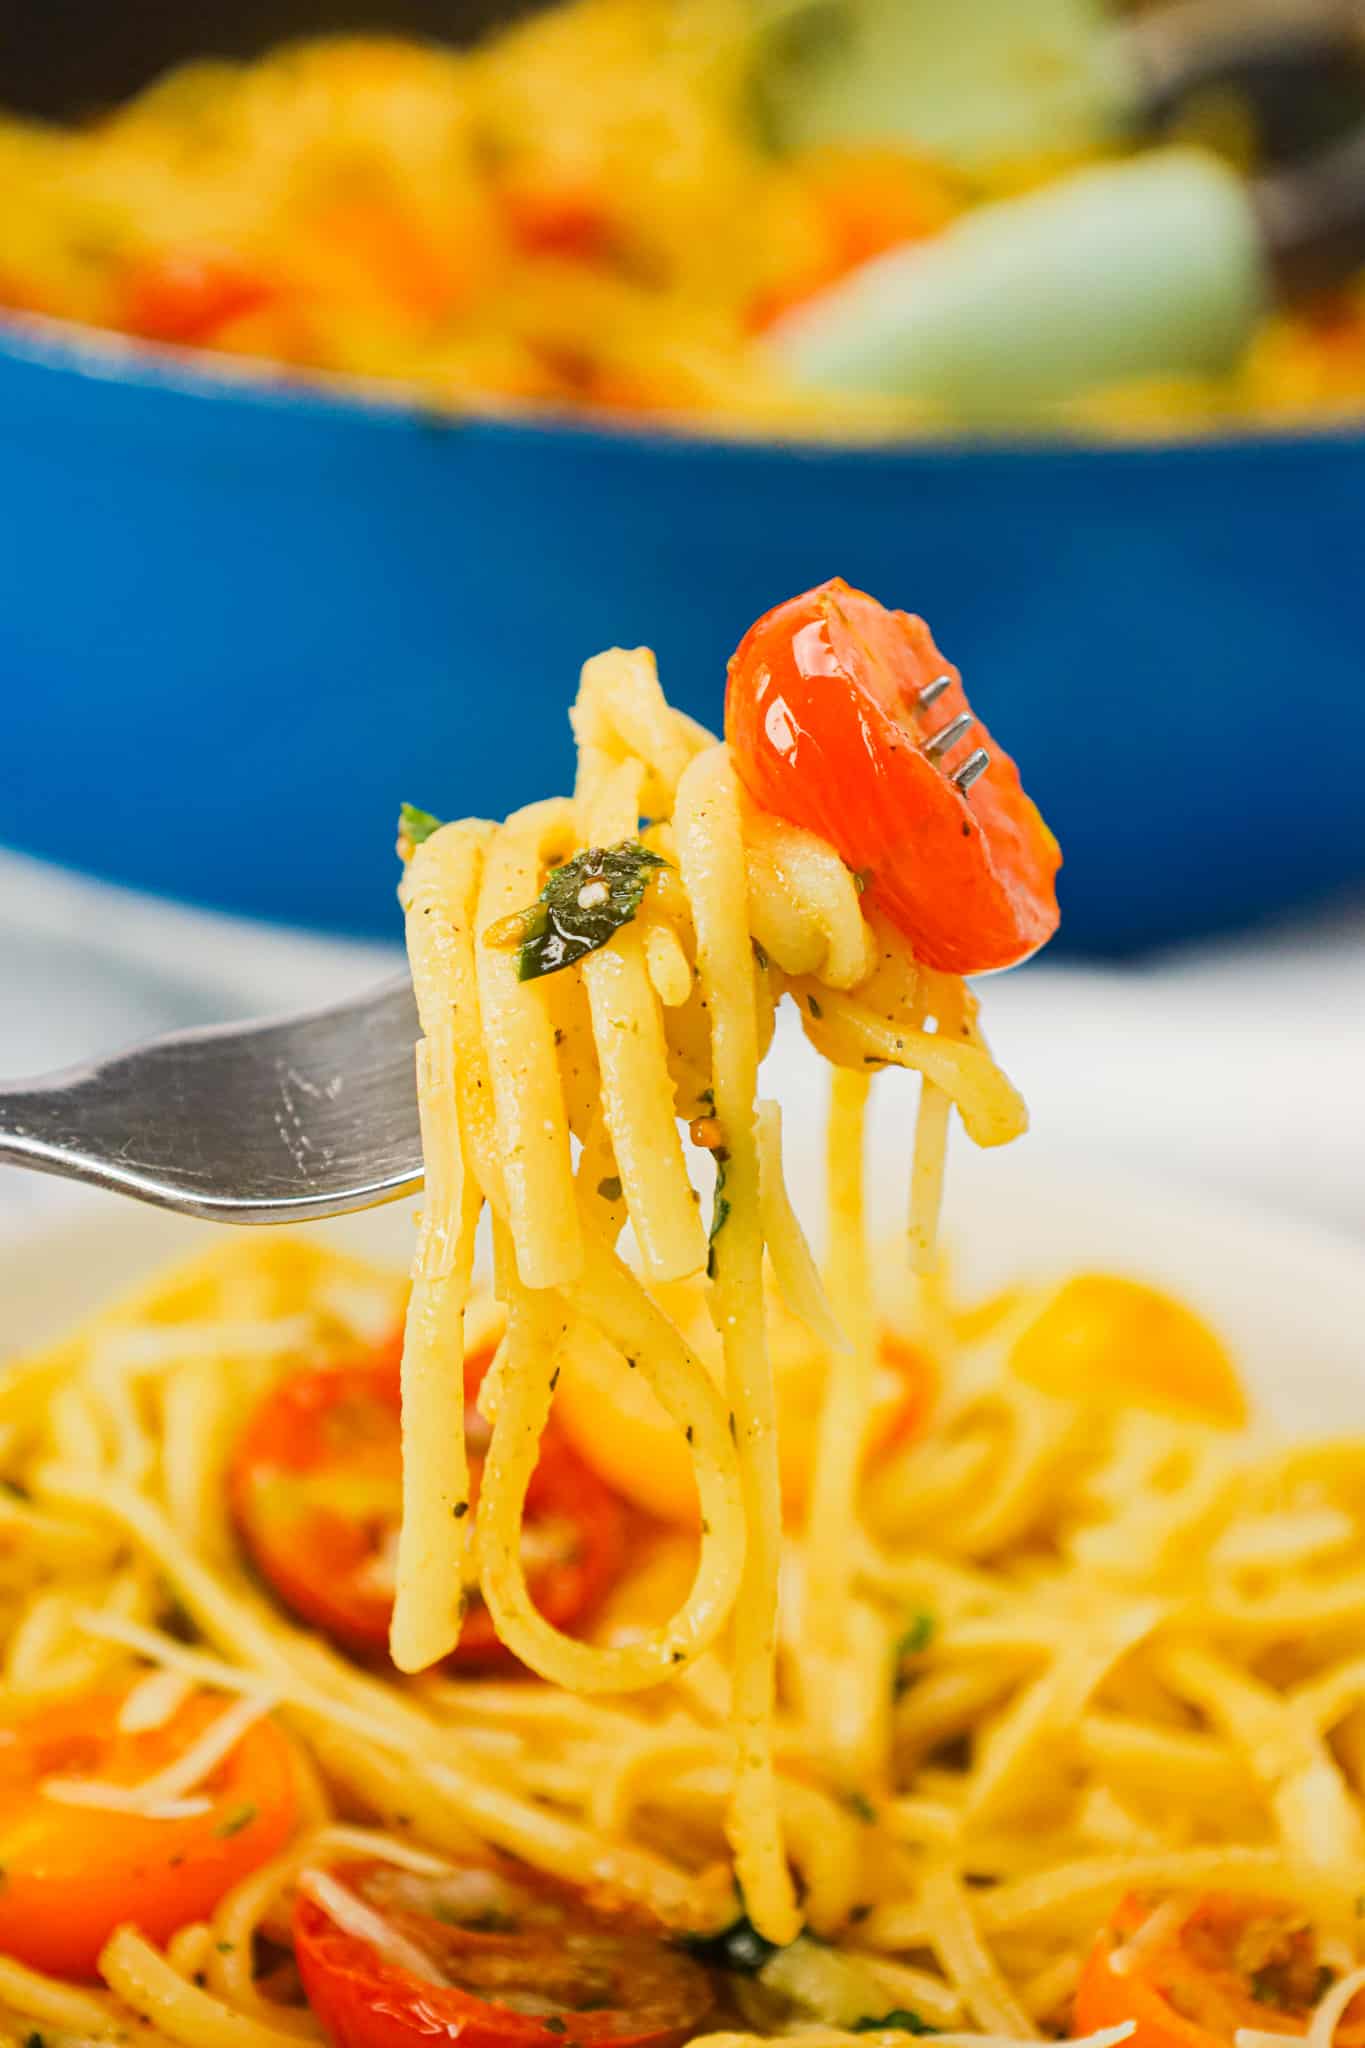 Linguine Positano is a delicious pasta dish loaded with fresh cherry tomatoes, onions, basil, parsley and garlic puree all tossed in olive oil.